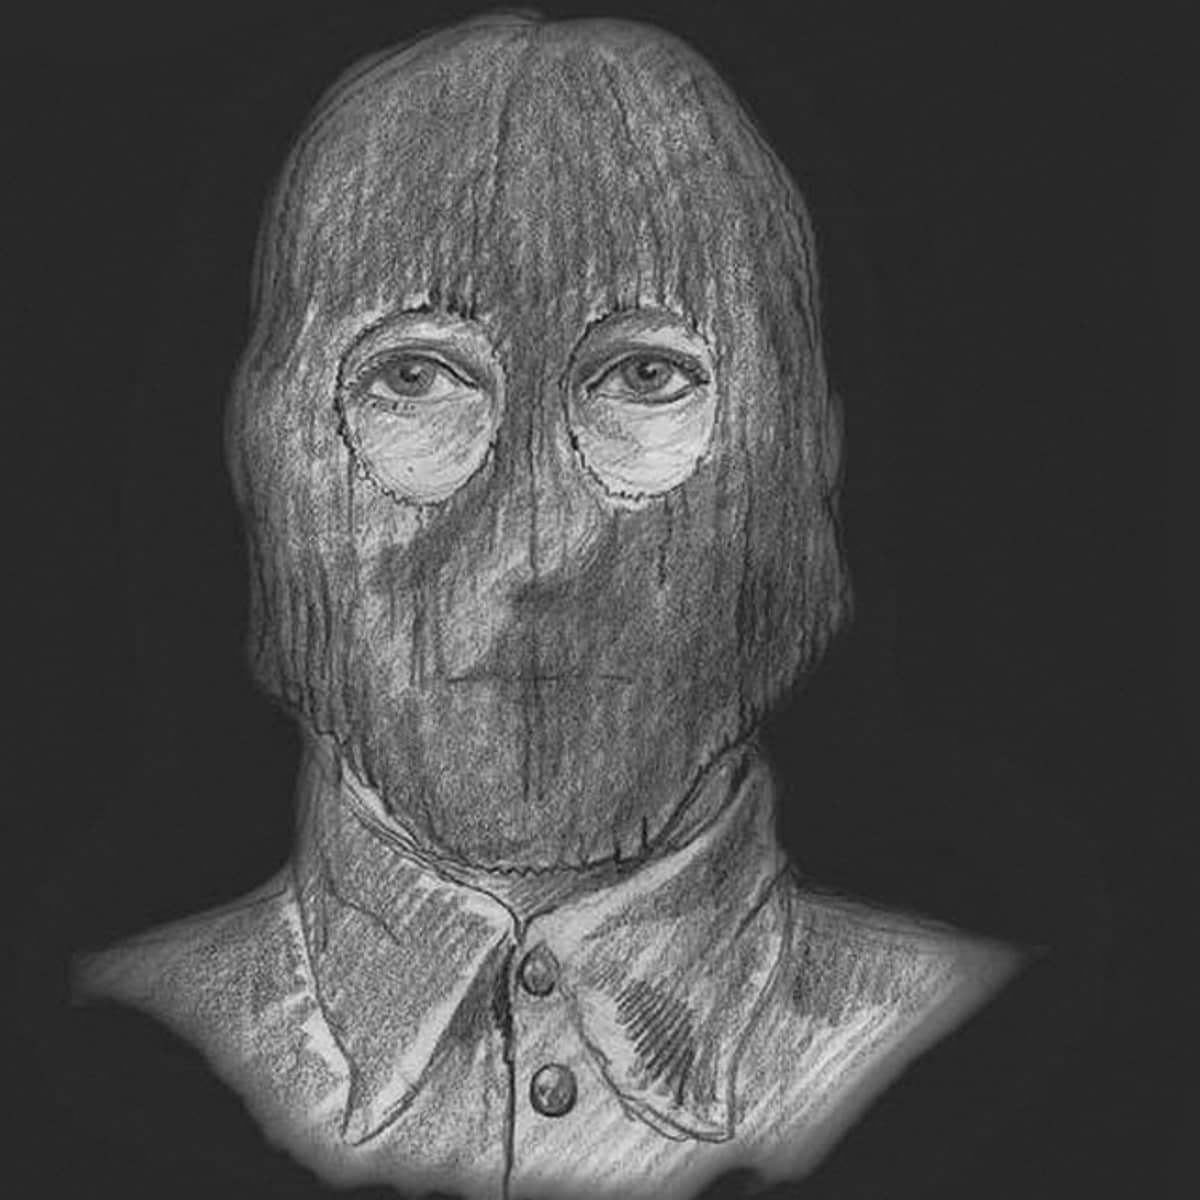 Man In The Window: The Golden State Killer - True Crime Podcast